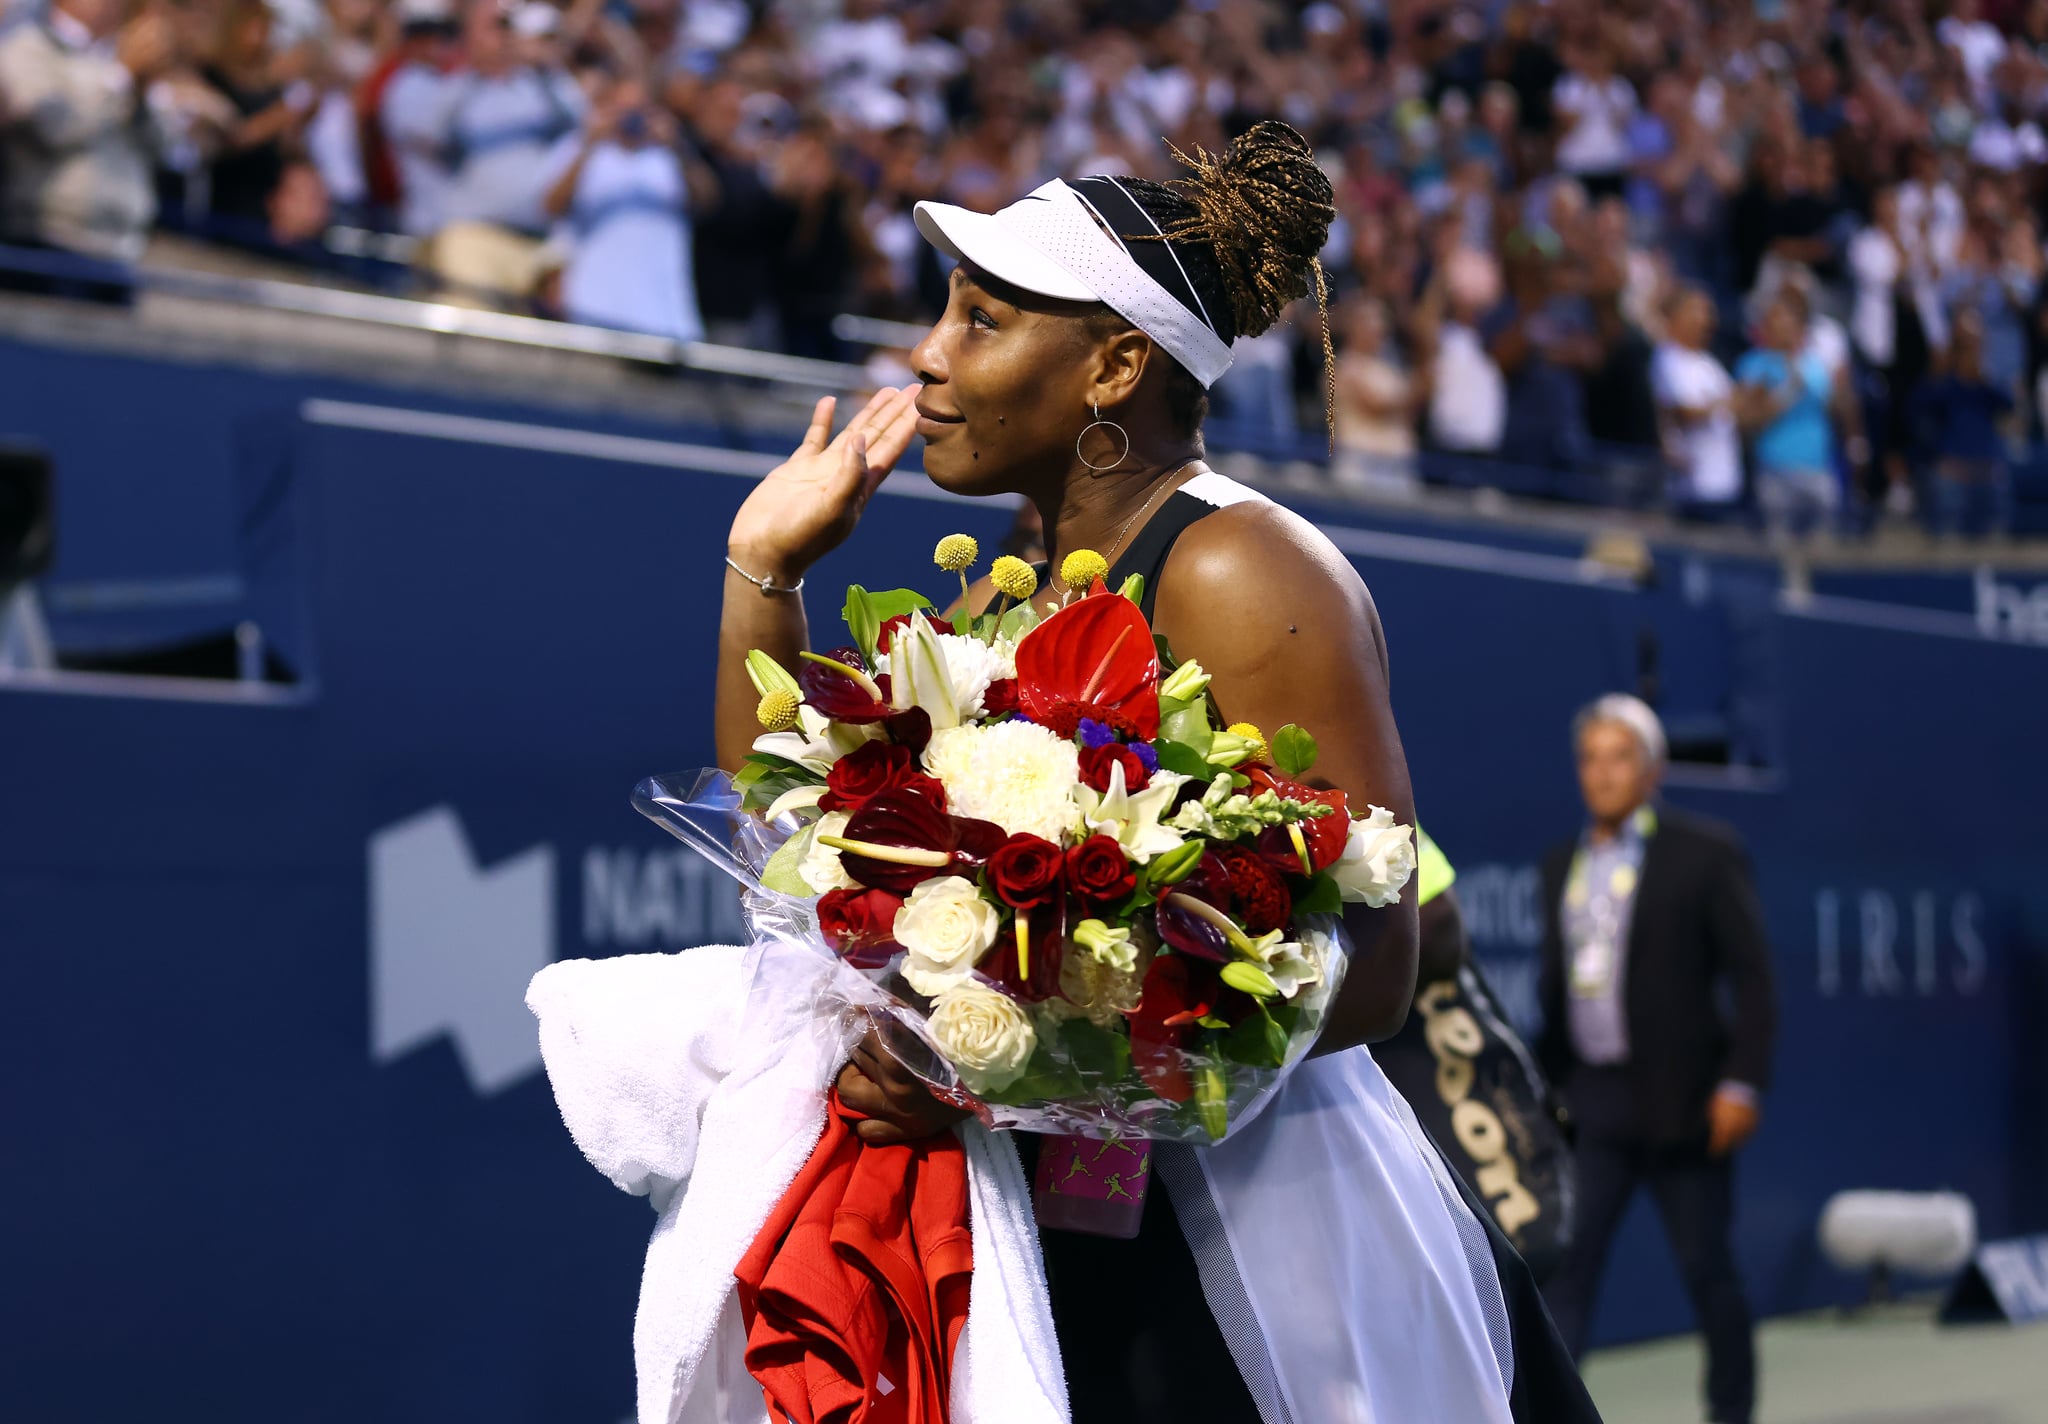 TORONTO, ON - AUGUST 10:  Serena Williams of the United States wavess to the crowd as she leaves the court after losing to Belinda Bencic of Switzerland during the National Bank Open, part of the Hologic WTA Tour, at Sobeys Stadium on August 10, 2022 in Toronto, Ontario, Canada. (Photo by Vaughn Ridley/Getty Images)